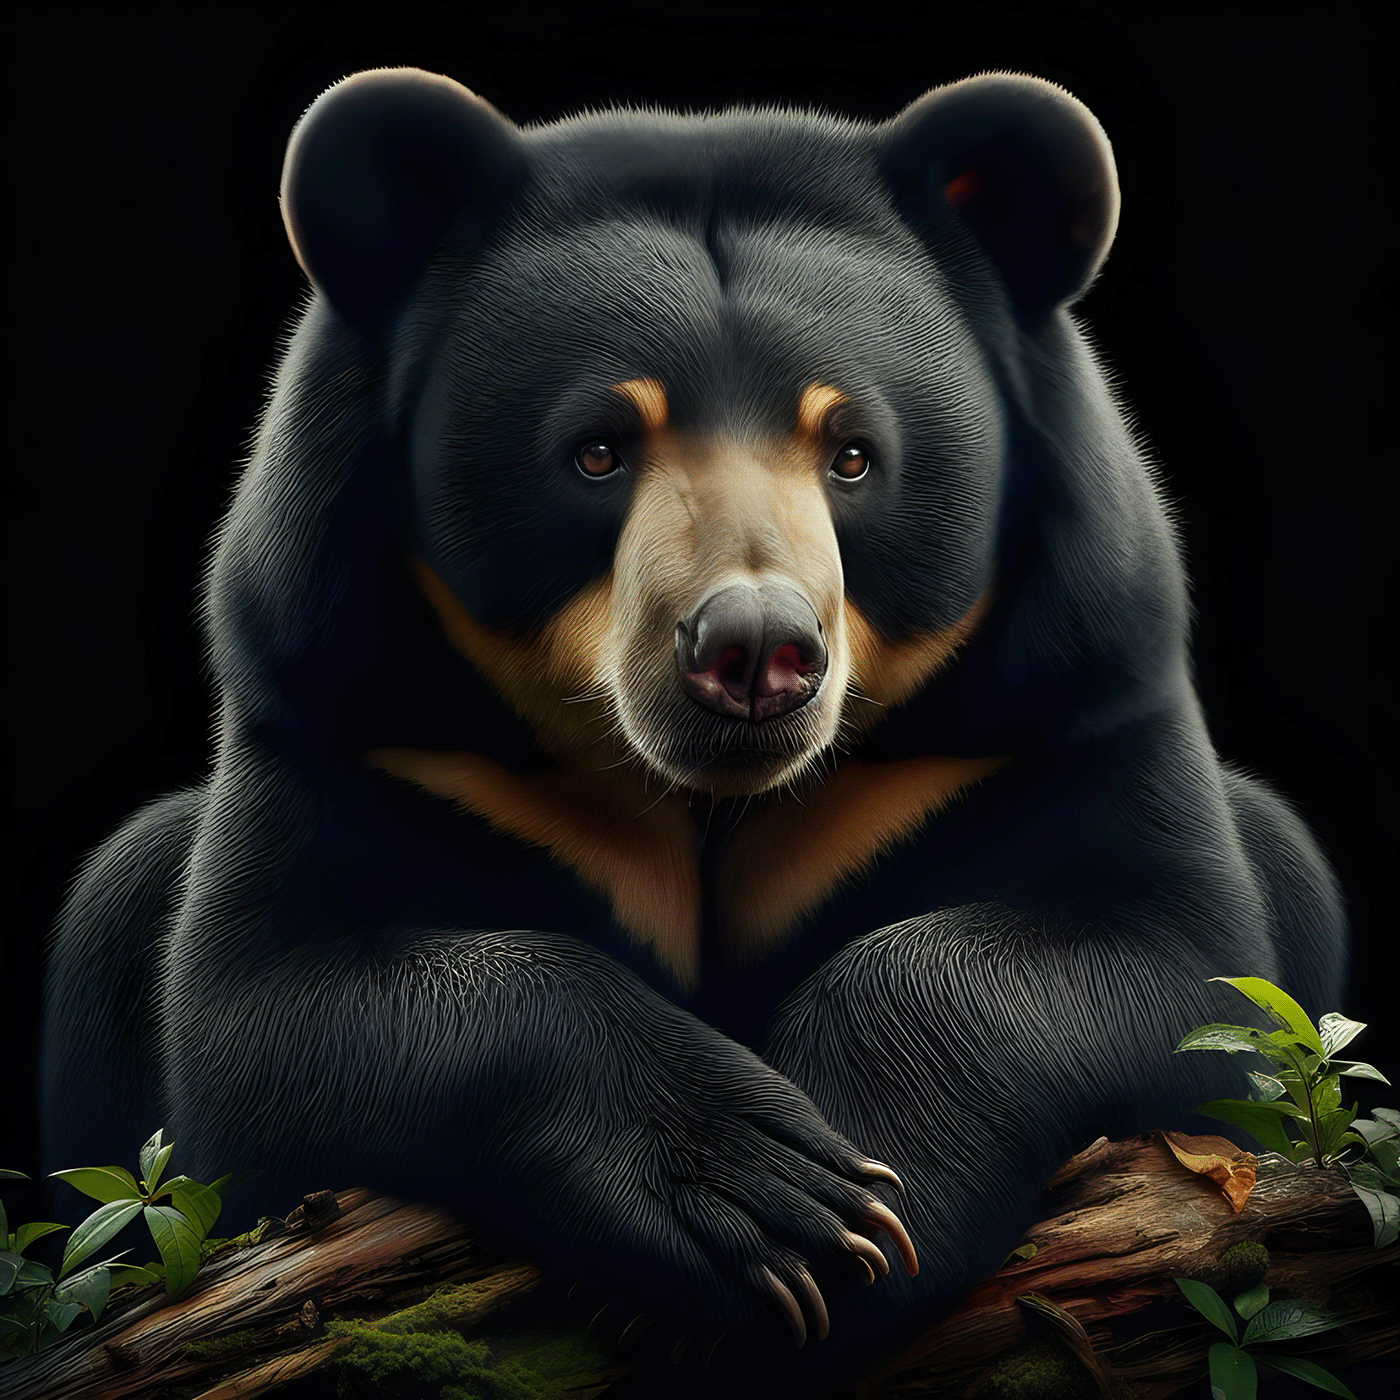 bear spectacled Amazon rare species